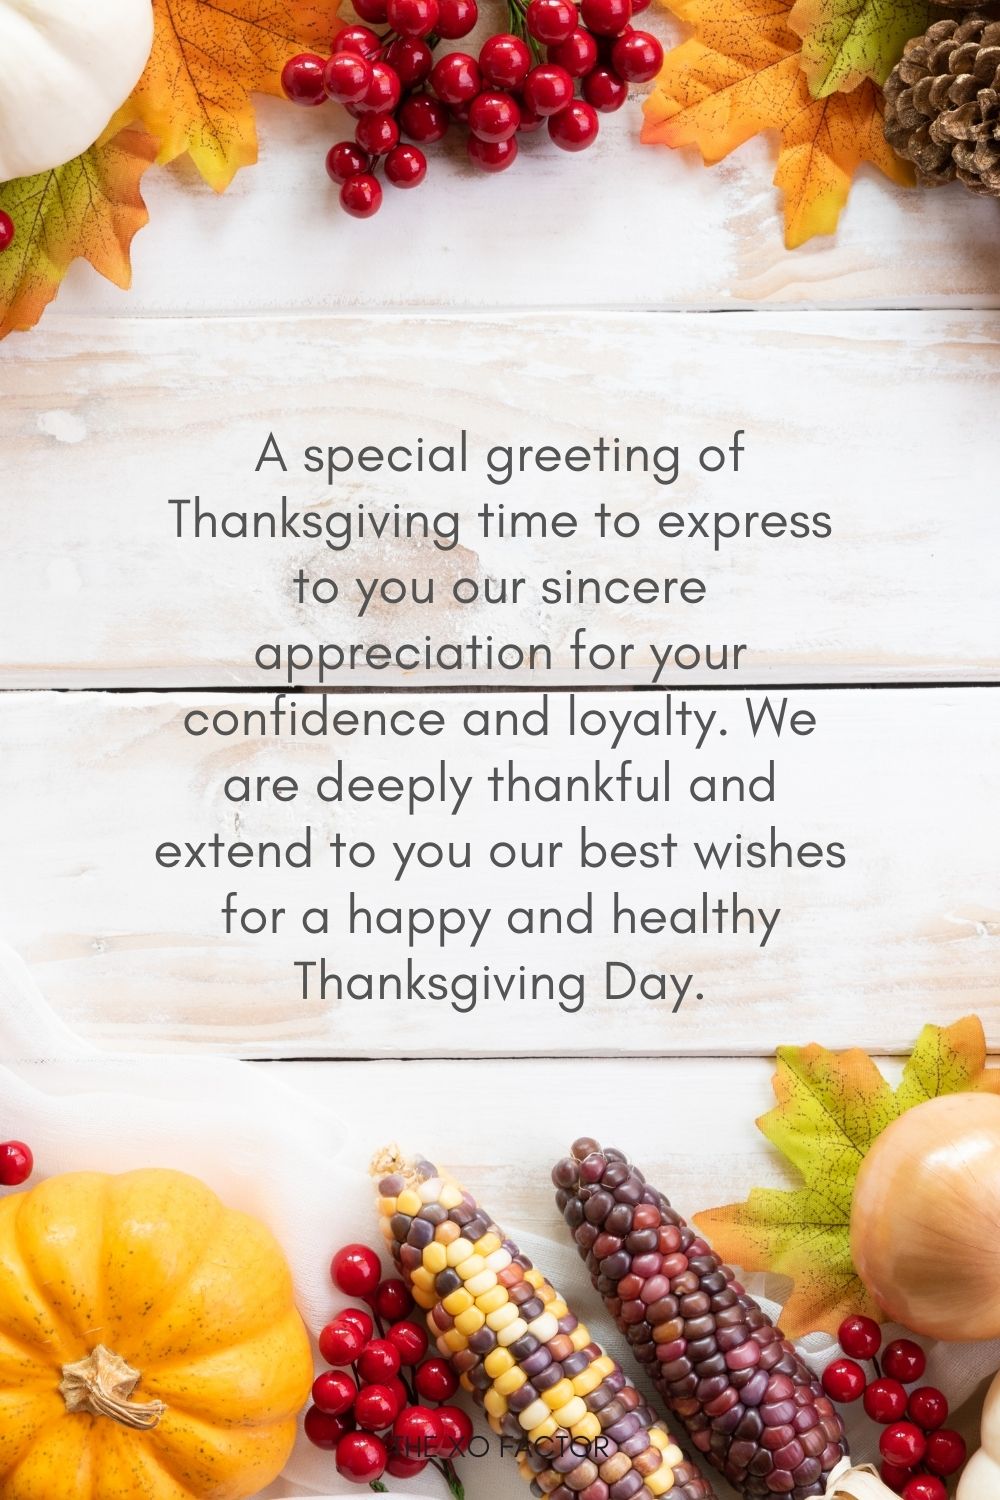 A special greeting of Thanksgiving time to express to you our sincere appreciation for your confidence and loyalty. We are deeply thankful and extend to you our best wishes for a happy and healthy Thanksgiving Day.